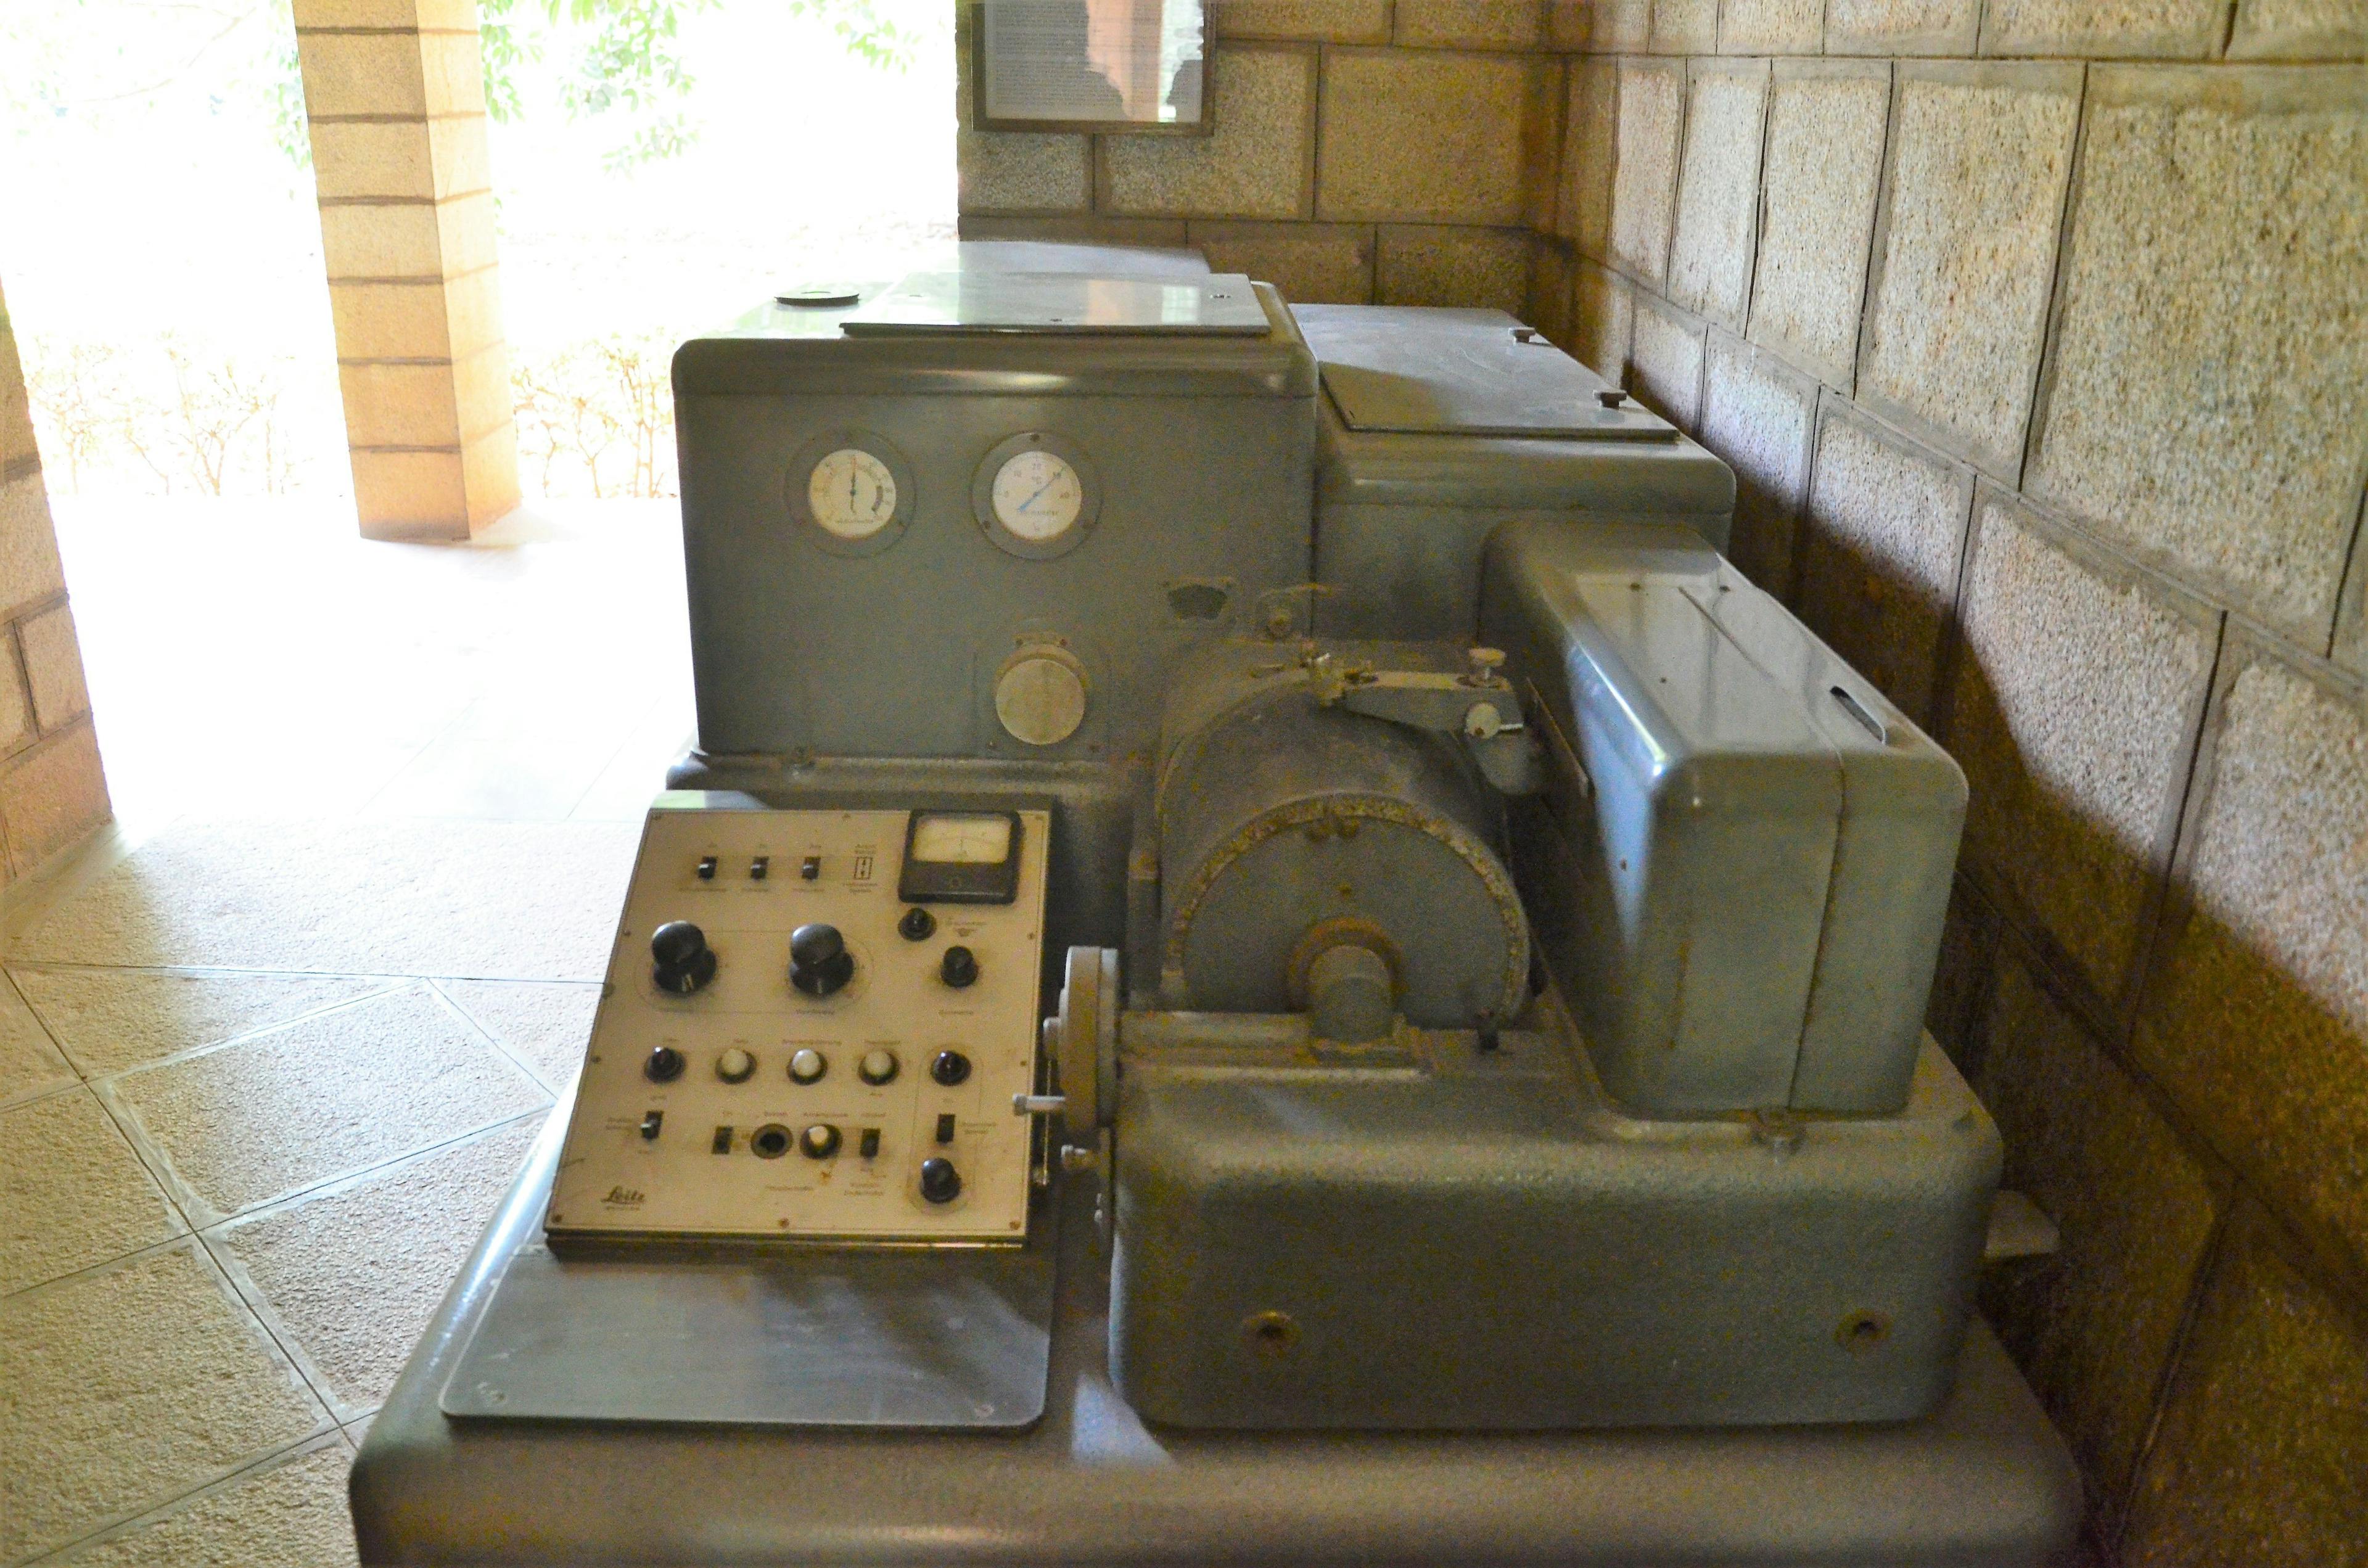 Infrared Spectrometer used by Sir C.V. Raman on display in main building